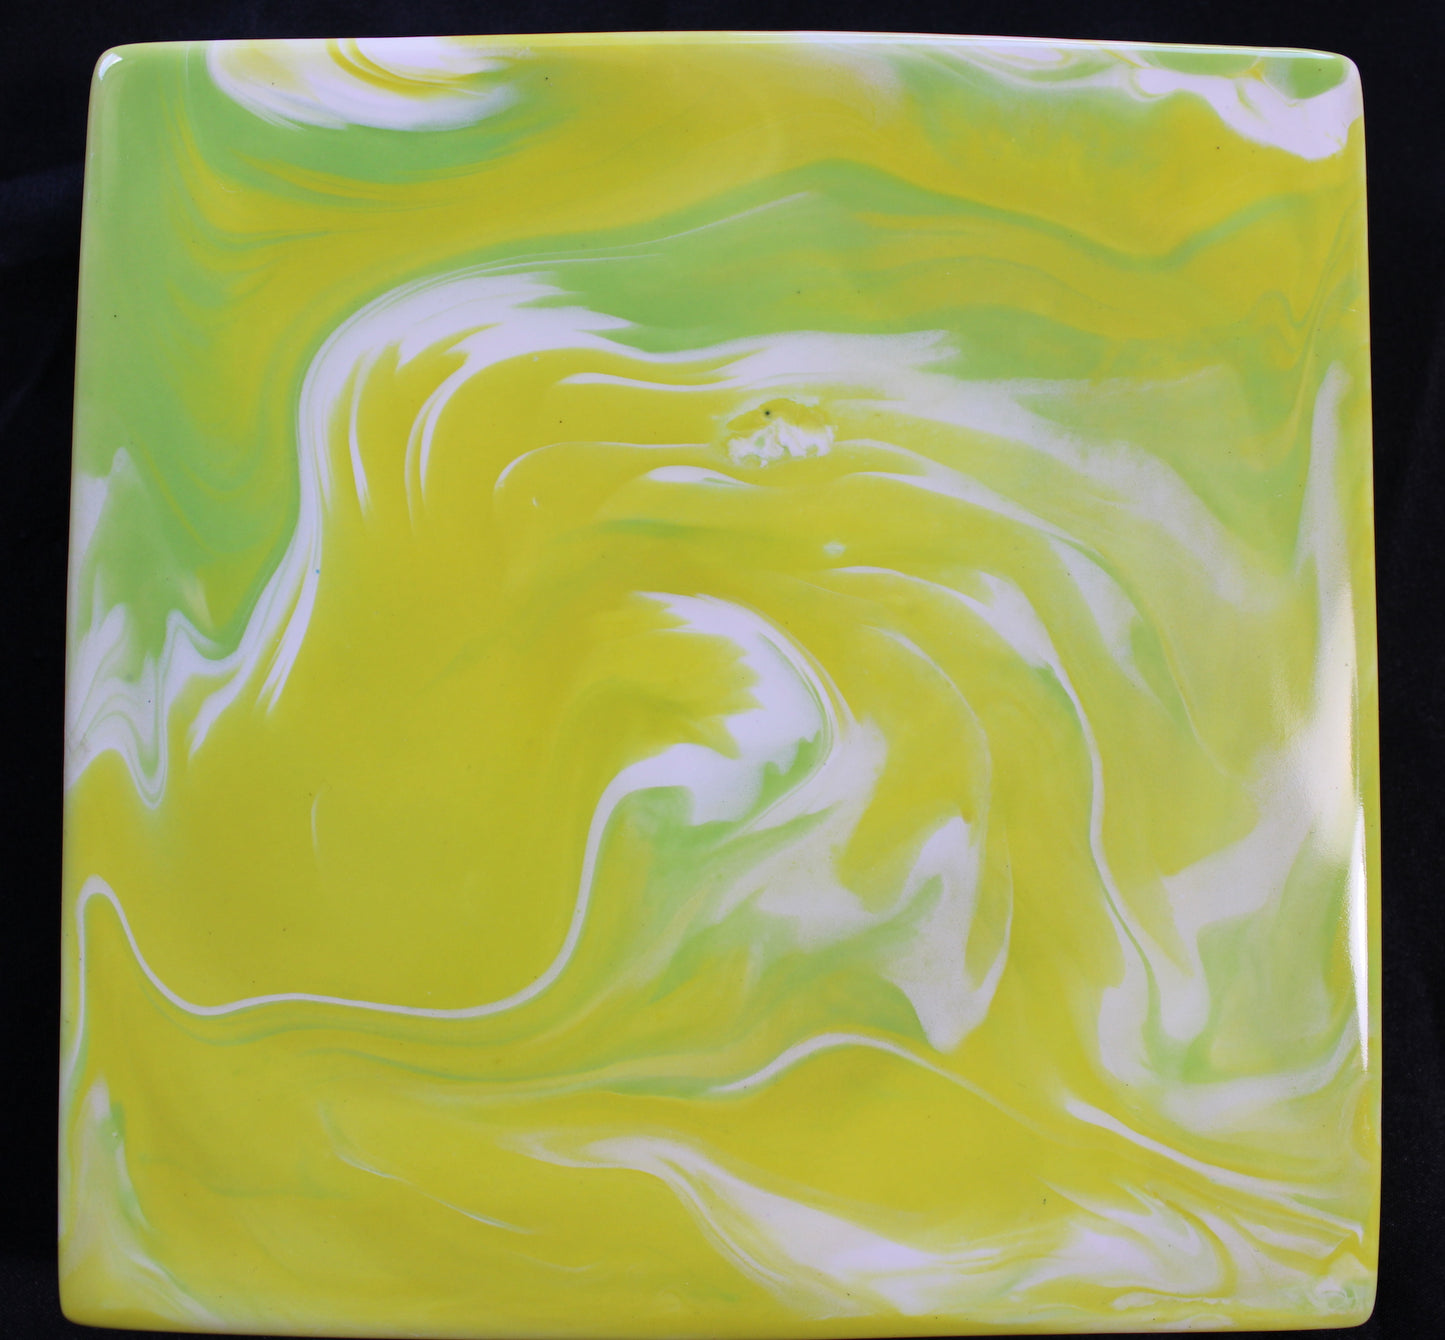 6" Square - Clay Canvas Glaze Painting